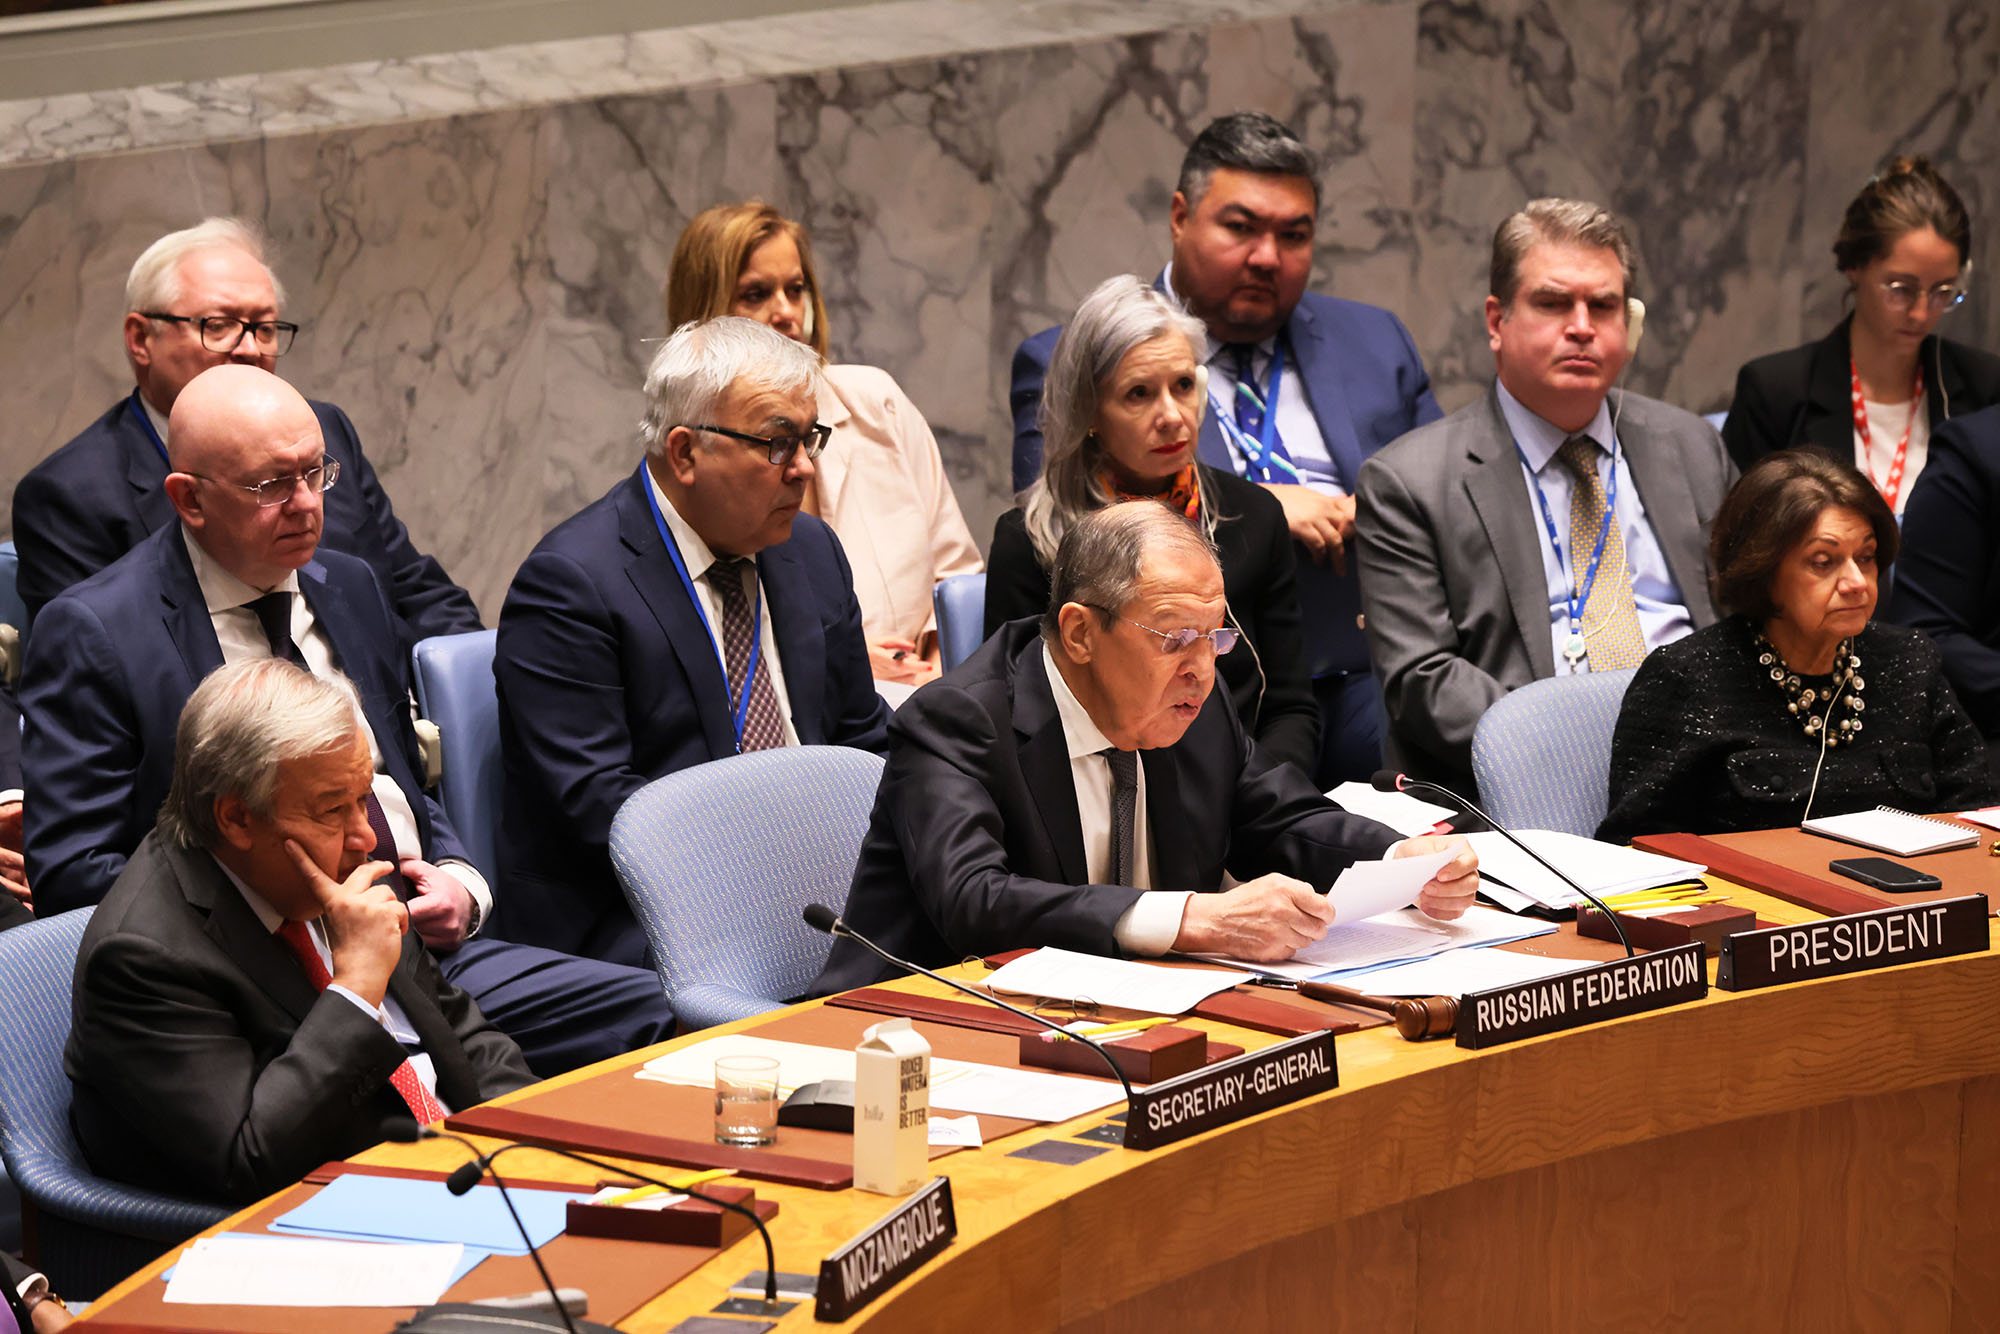 Russian Foreign Minister and Security Council Acting President for the month of April Sergey Lavrov, center, speaks during a Security Council meeting at the United Nations headquarters on April 24, in New York City. 